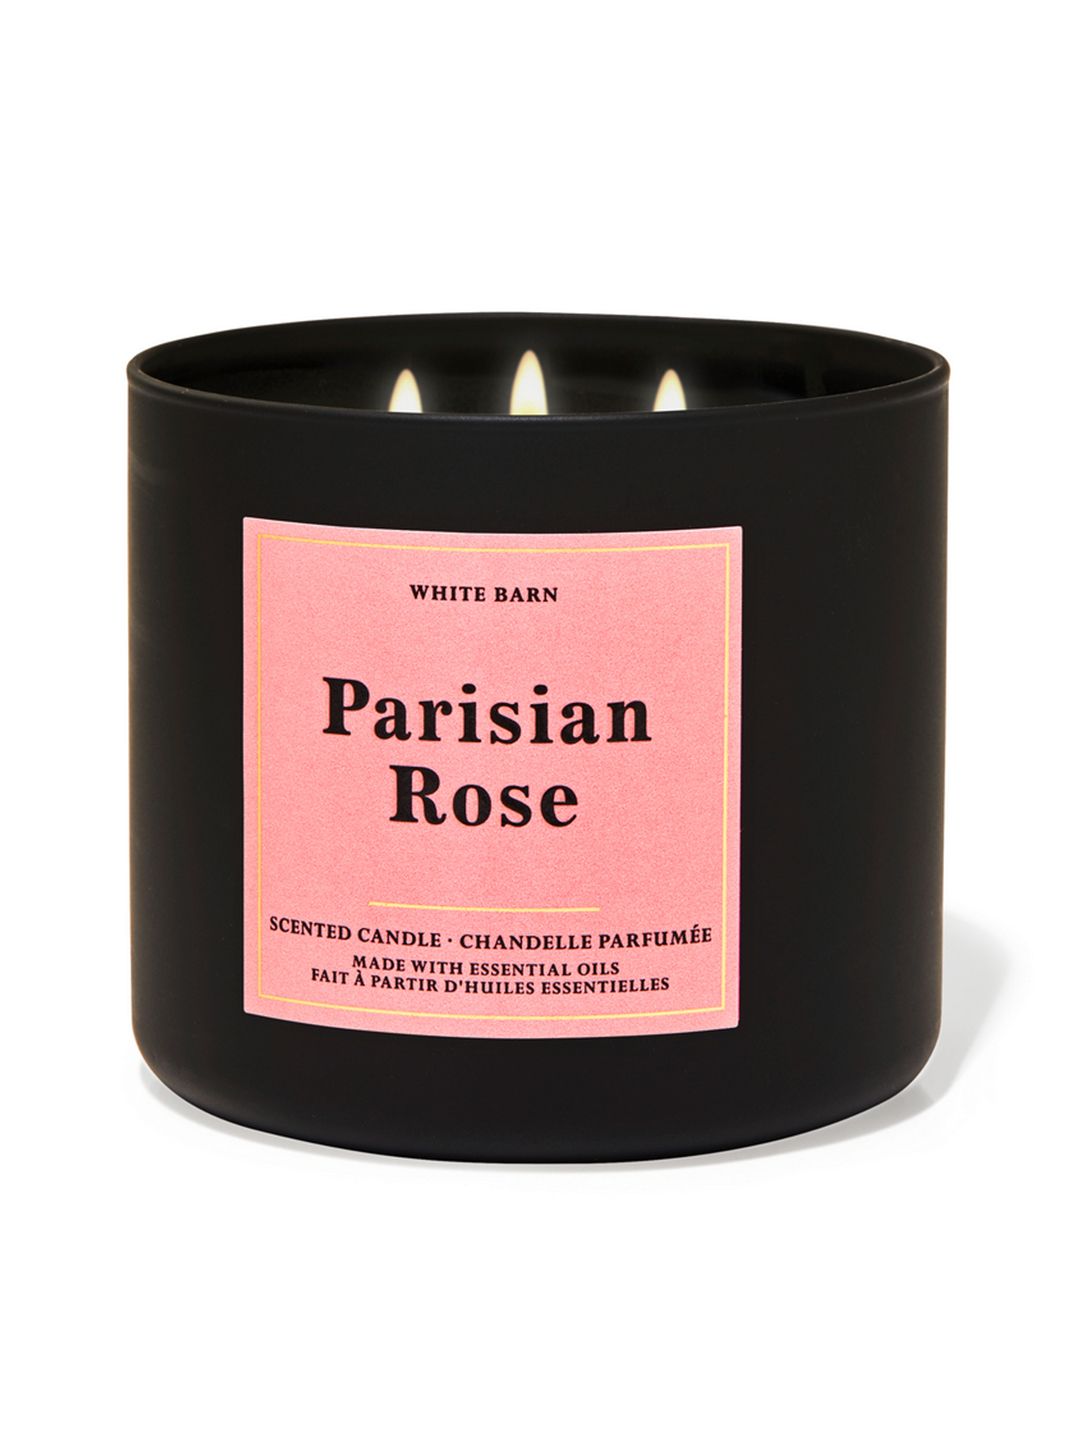 Bath & Body Works Parisian Rose 3-Wick Candle 411 g Price in India